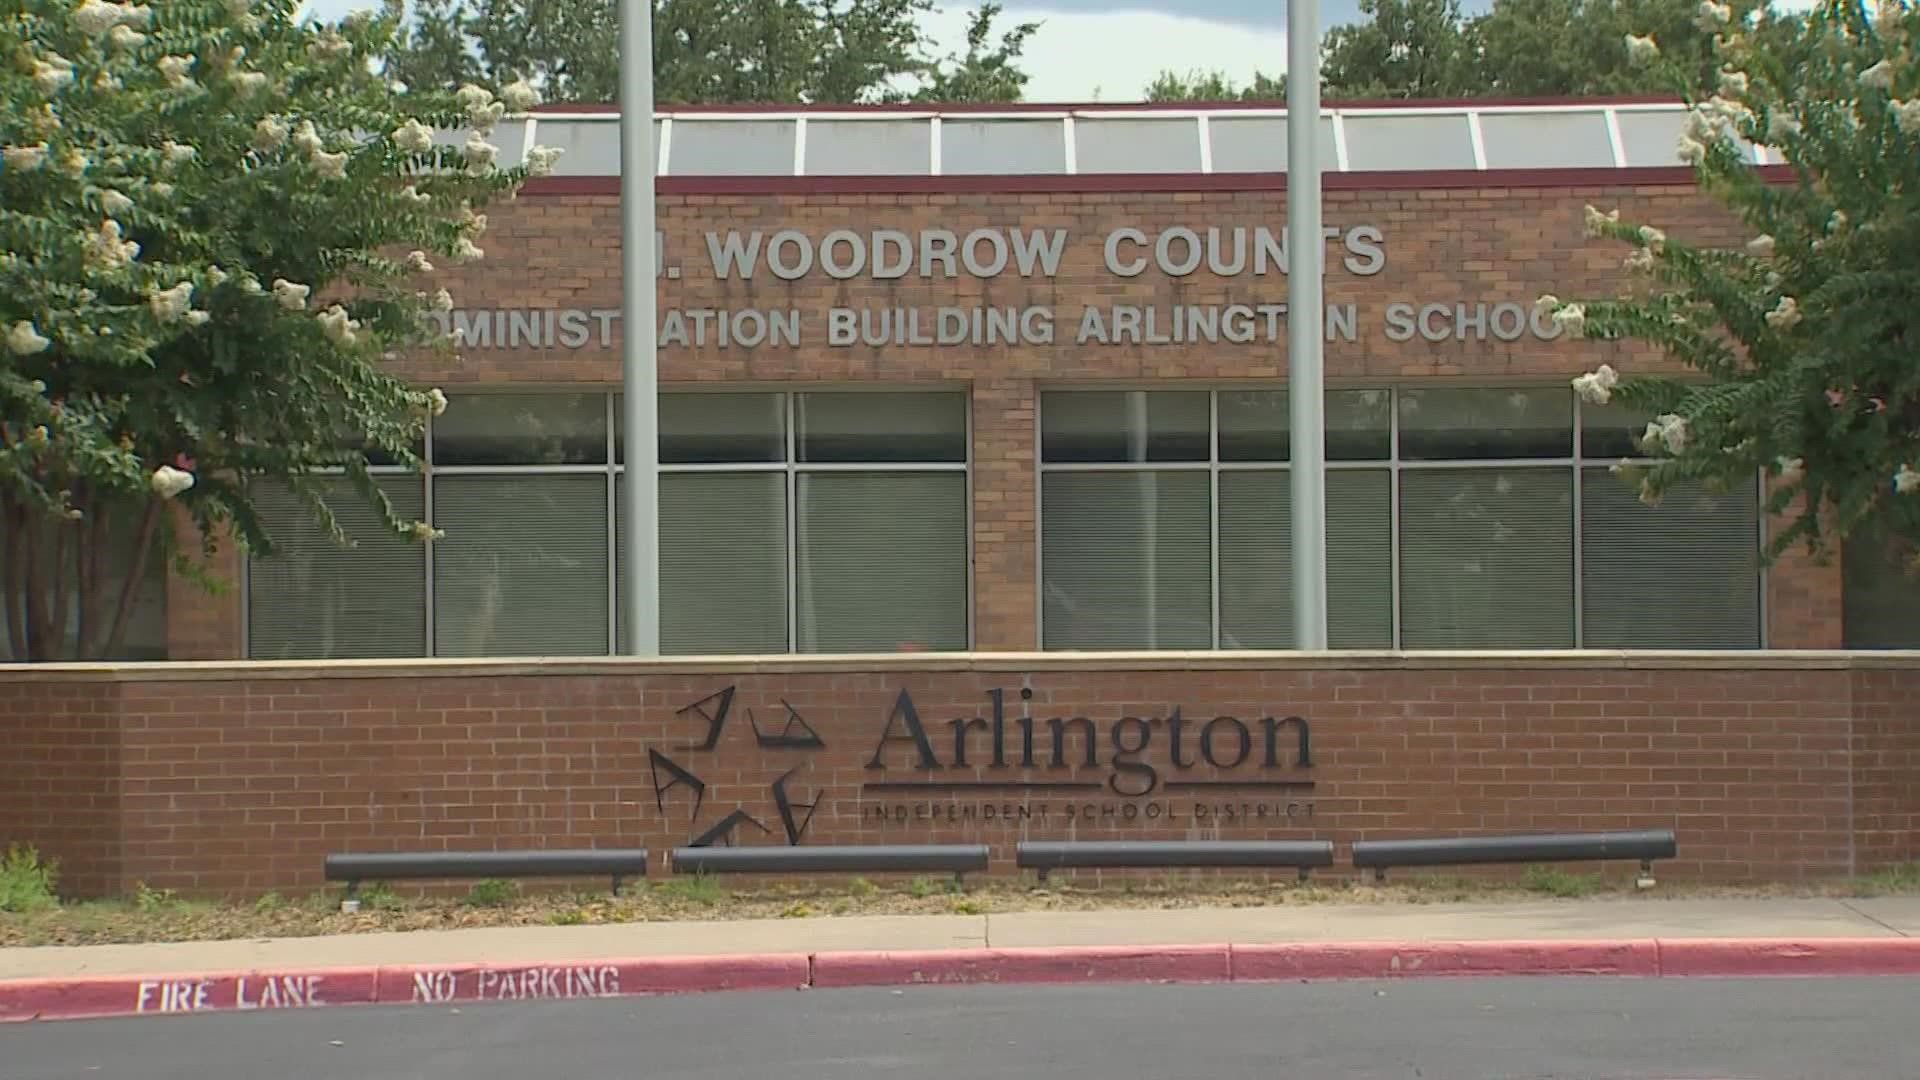 According to the district, the legal action being drafted will be reviewed at the Arlington ISD board meeting on Thursday, Aug. 19.